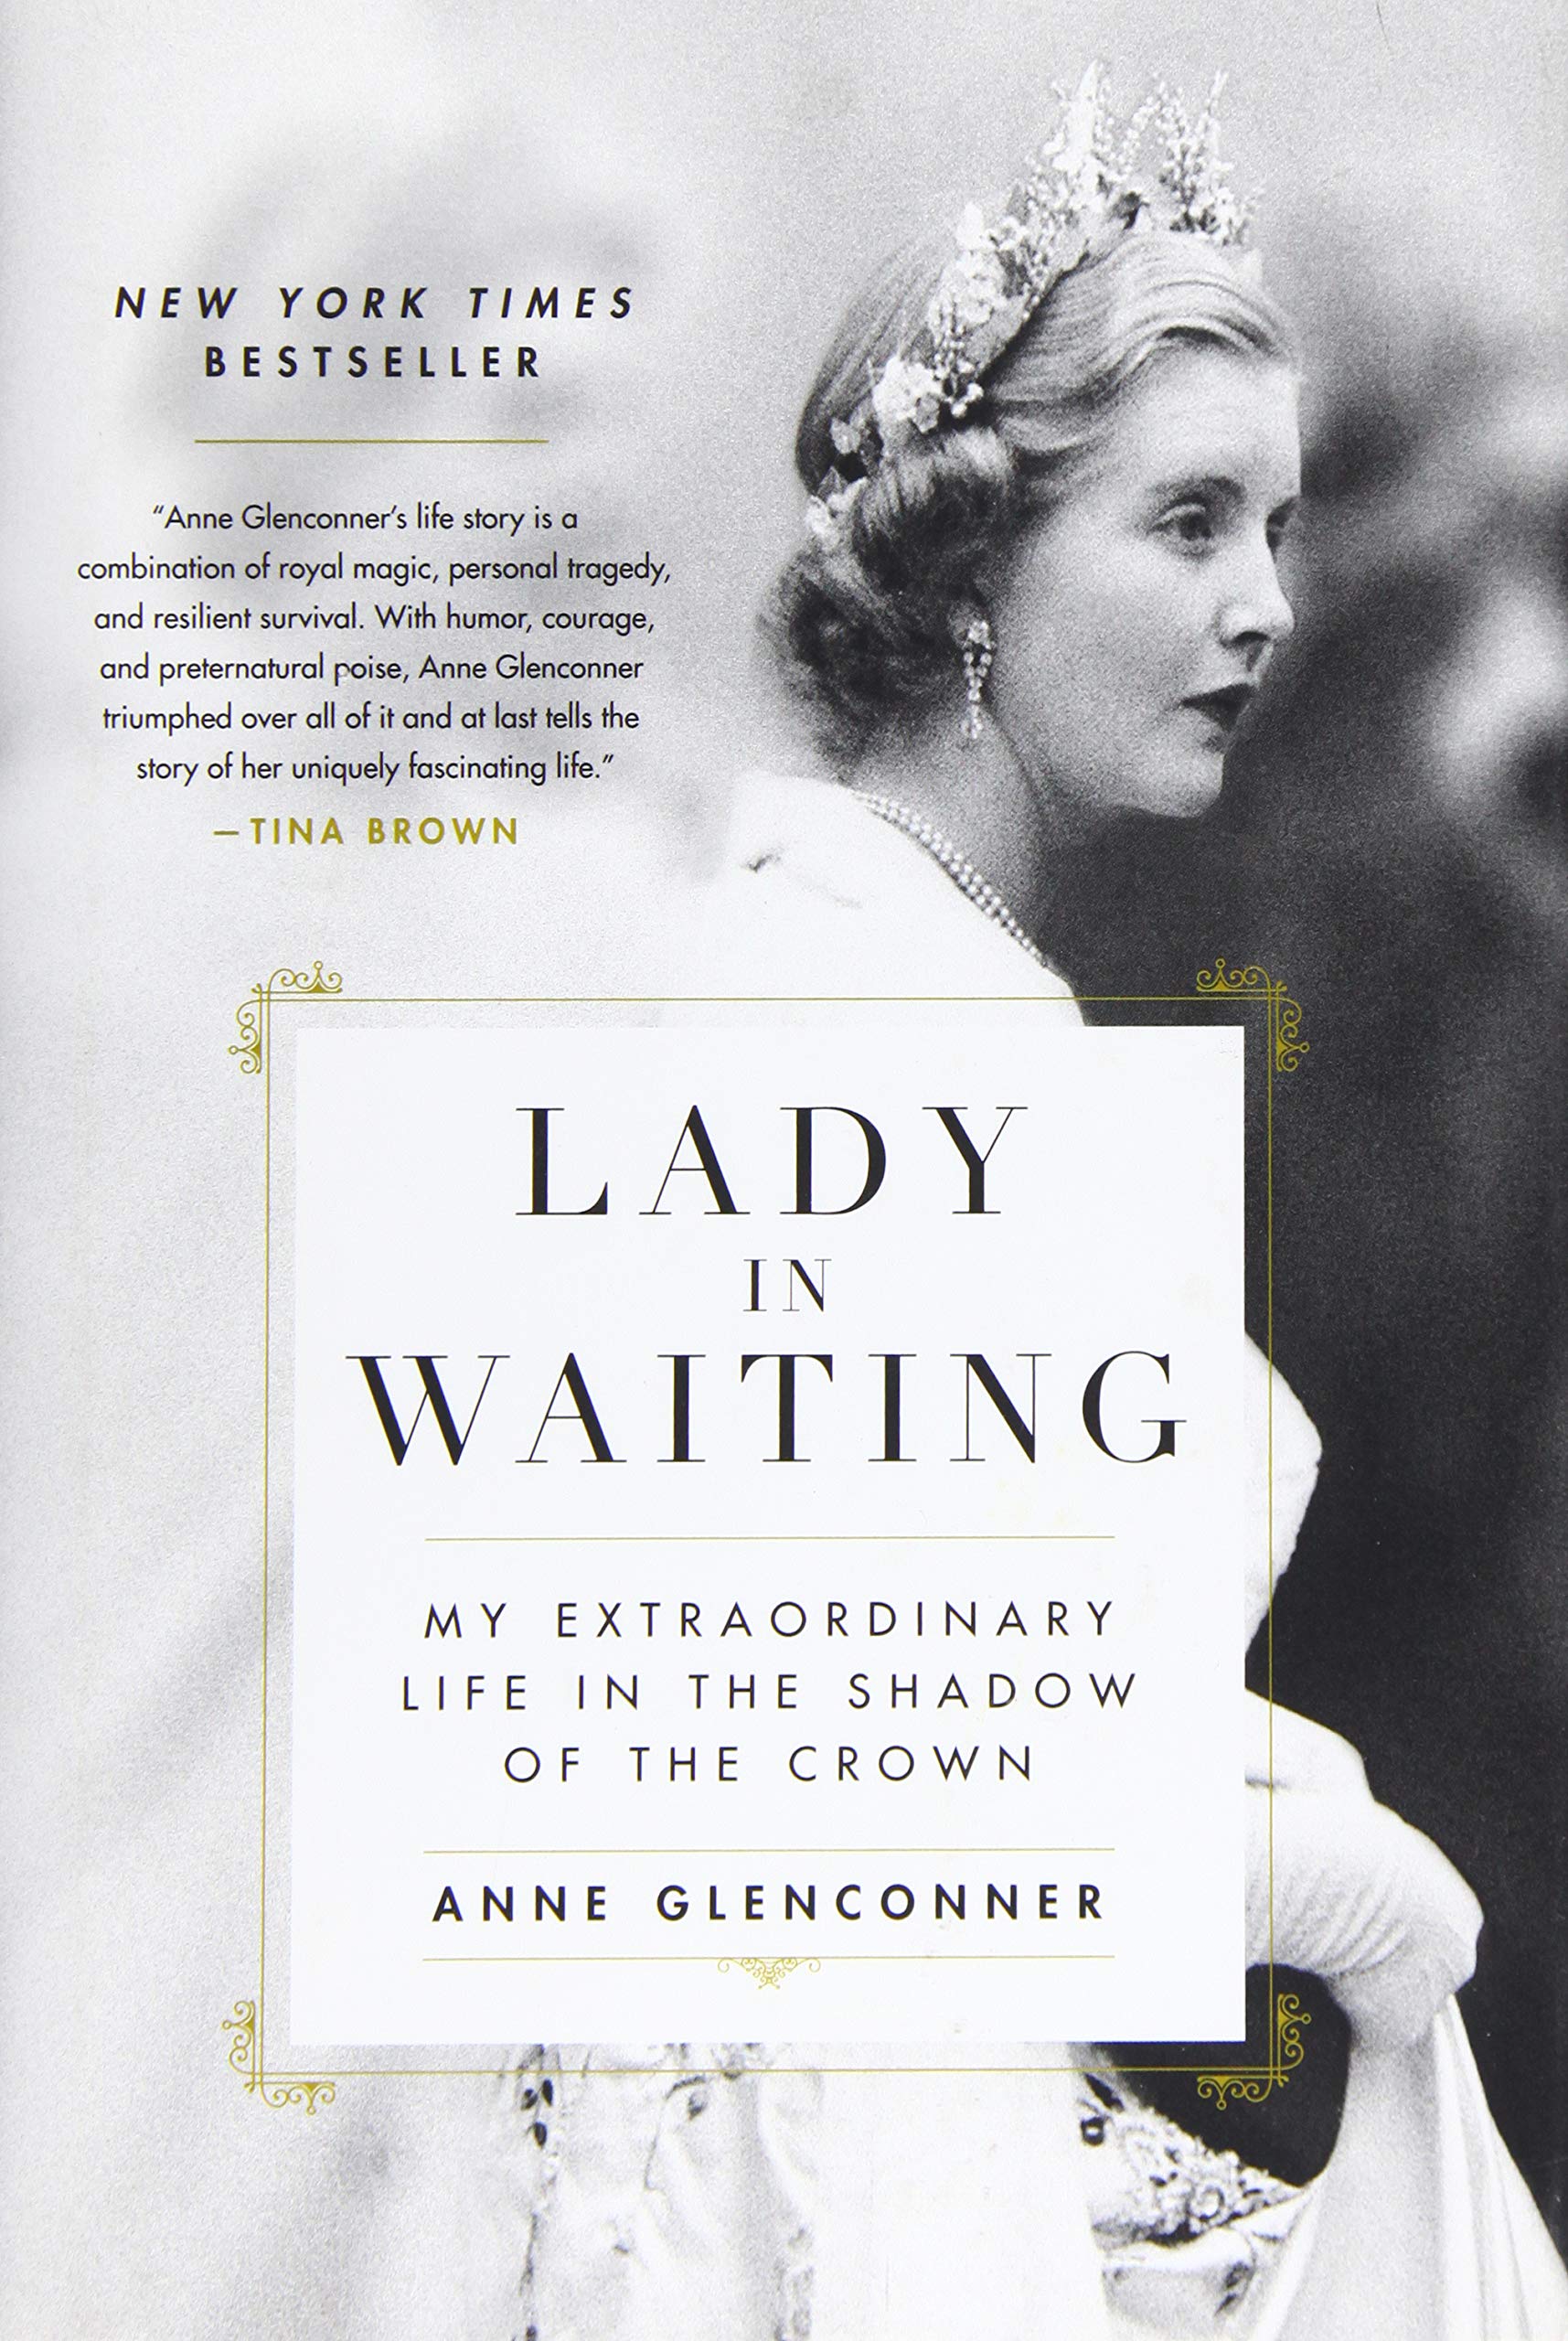 Image for "Lady in Waiting"